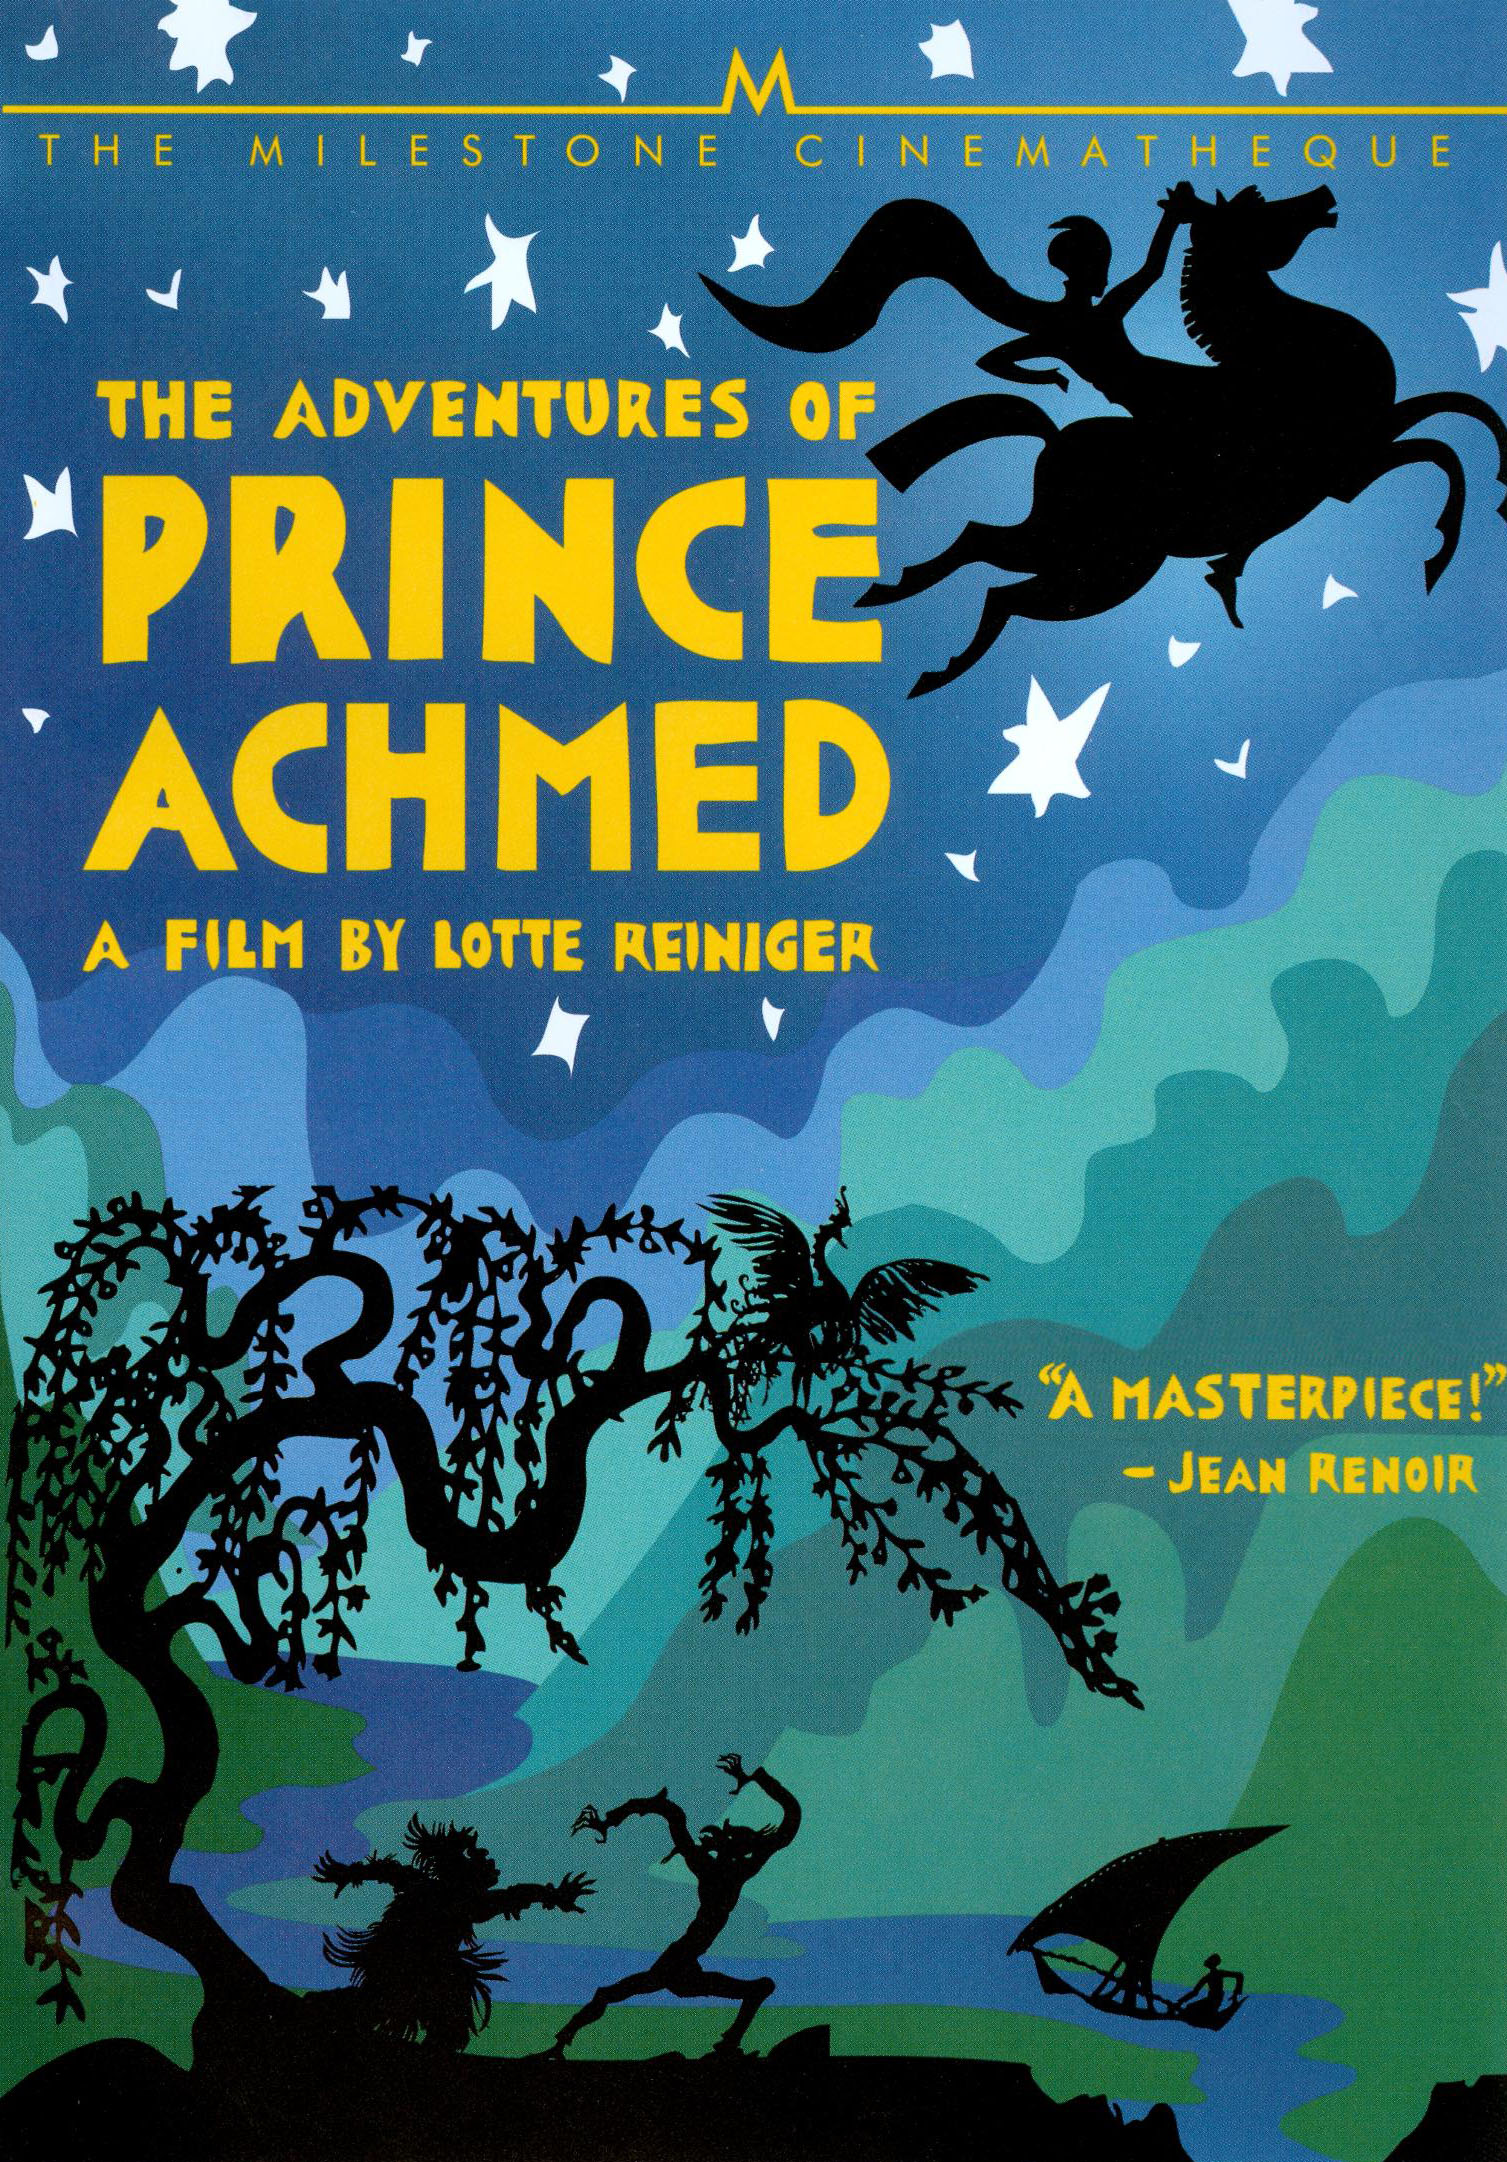 The Adventures of Prince Achmed [DVD] [1926]